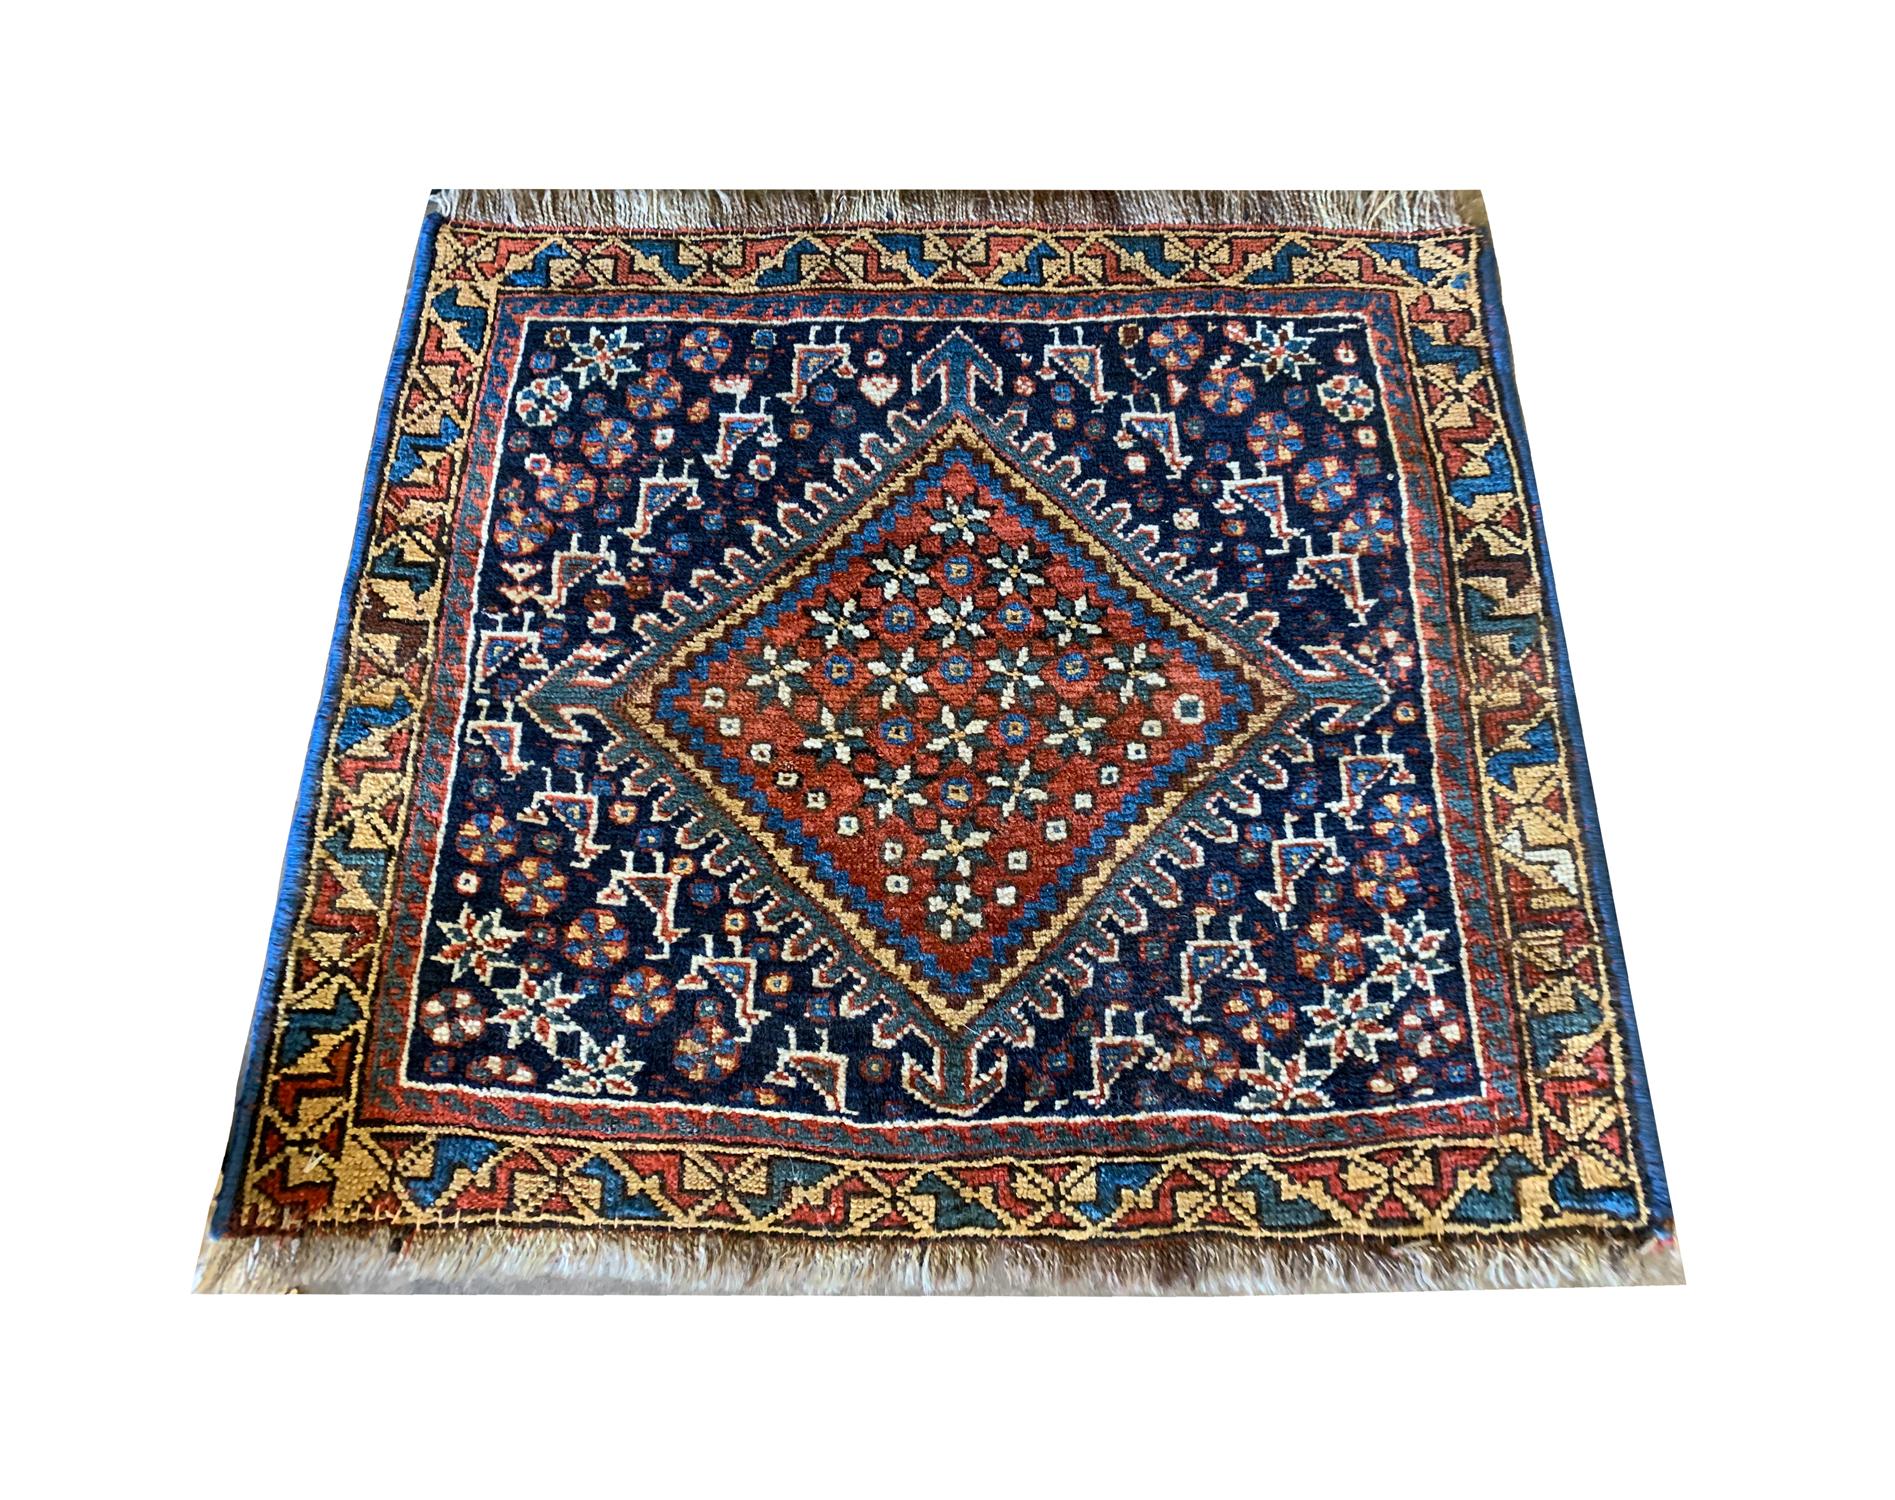 This small antique Caucasian wool rug was woven by hand in Azerbaijan in the 1880s with the finest locally sourced materials. The central design features a large square medallion decorated with a floral design in green and ivory on a rich red